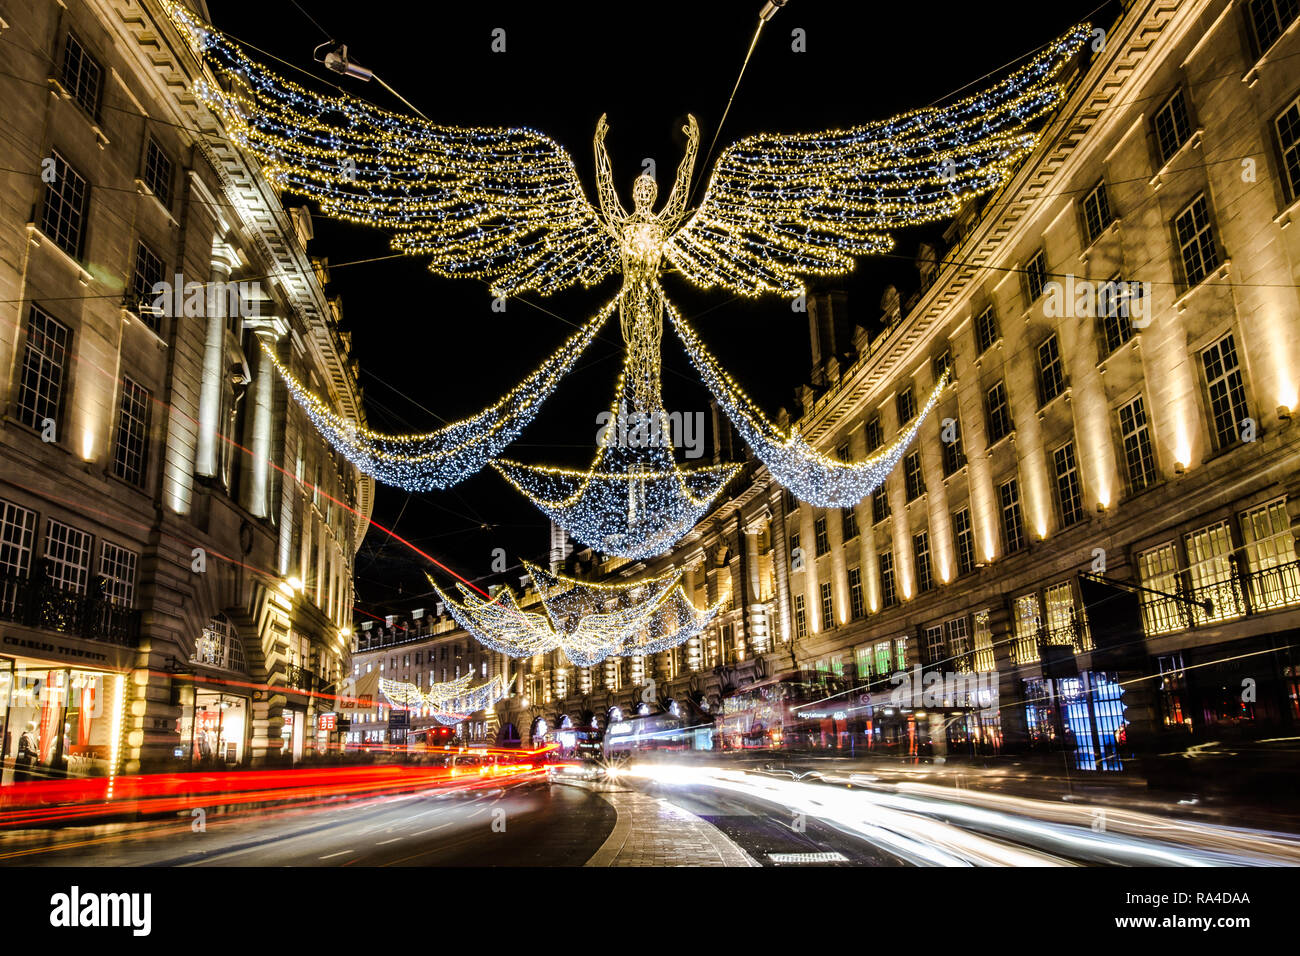 Regents Street Christmas lights in London, taken at dusk, early evening around Christmas 2018 Stock Photo